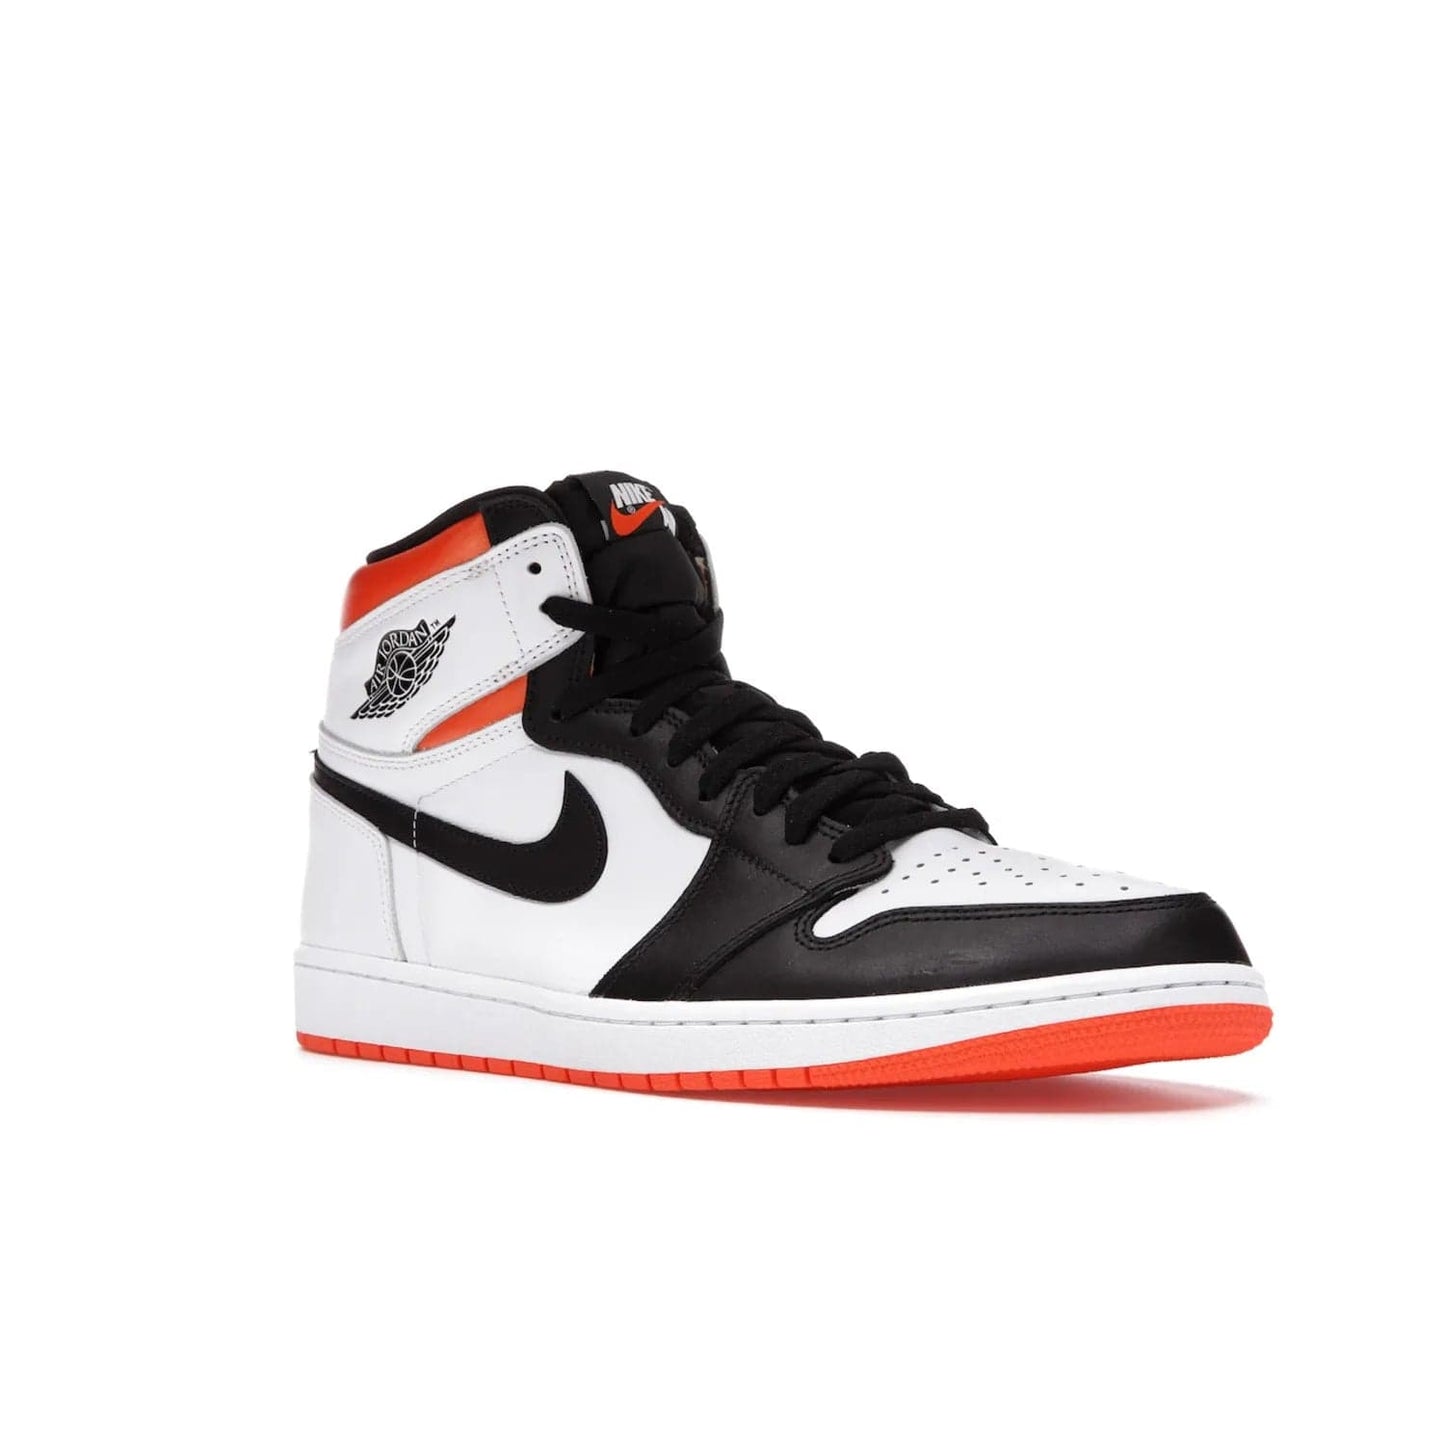 Jordan 1 Retro High Electro Orange - Image 5 - Only at www.BallersClubKickz.com - This Air Jordan 1 Retro High Electro Orange features a white leather upper with black overlays and vibrant Hyper Orange ankle wrap. Turn heads with this iconic design of woven tongue label and sole. Get yours today and add some serious style to your rotation.